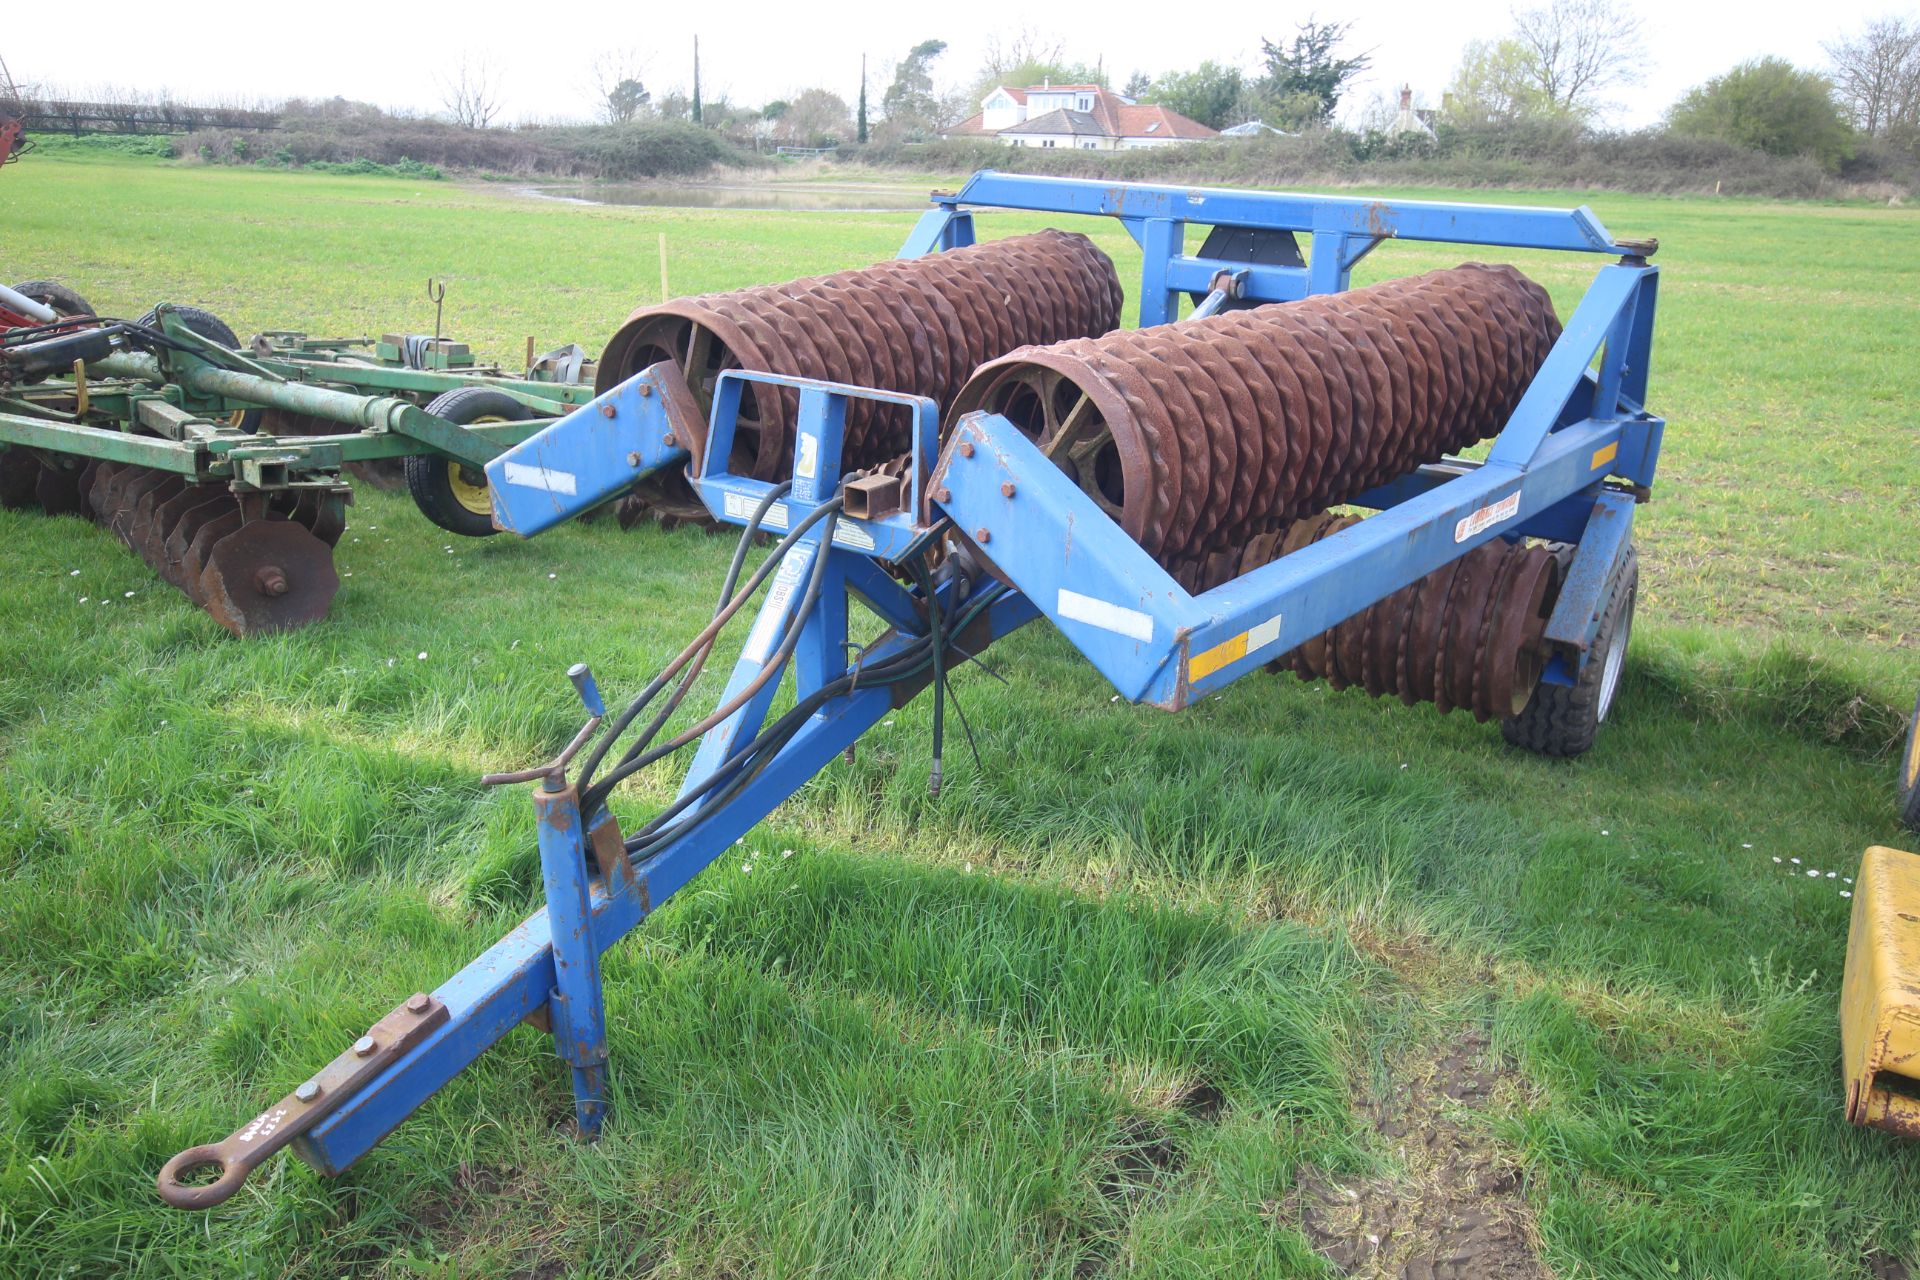 Dalbo 6.3m hydraulic folding rolls. With Snowflake rings. From a local Deceased estate.